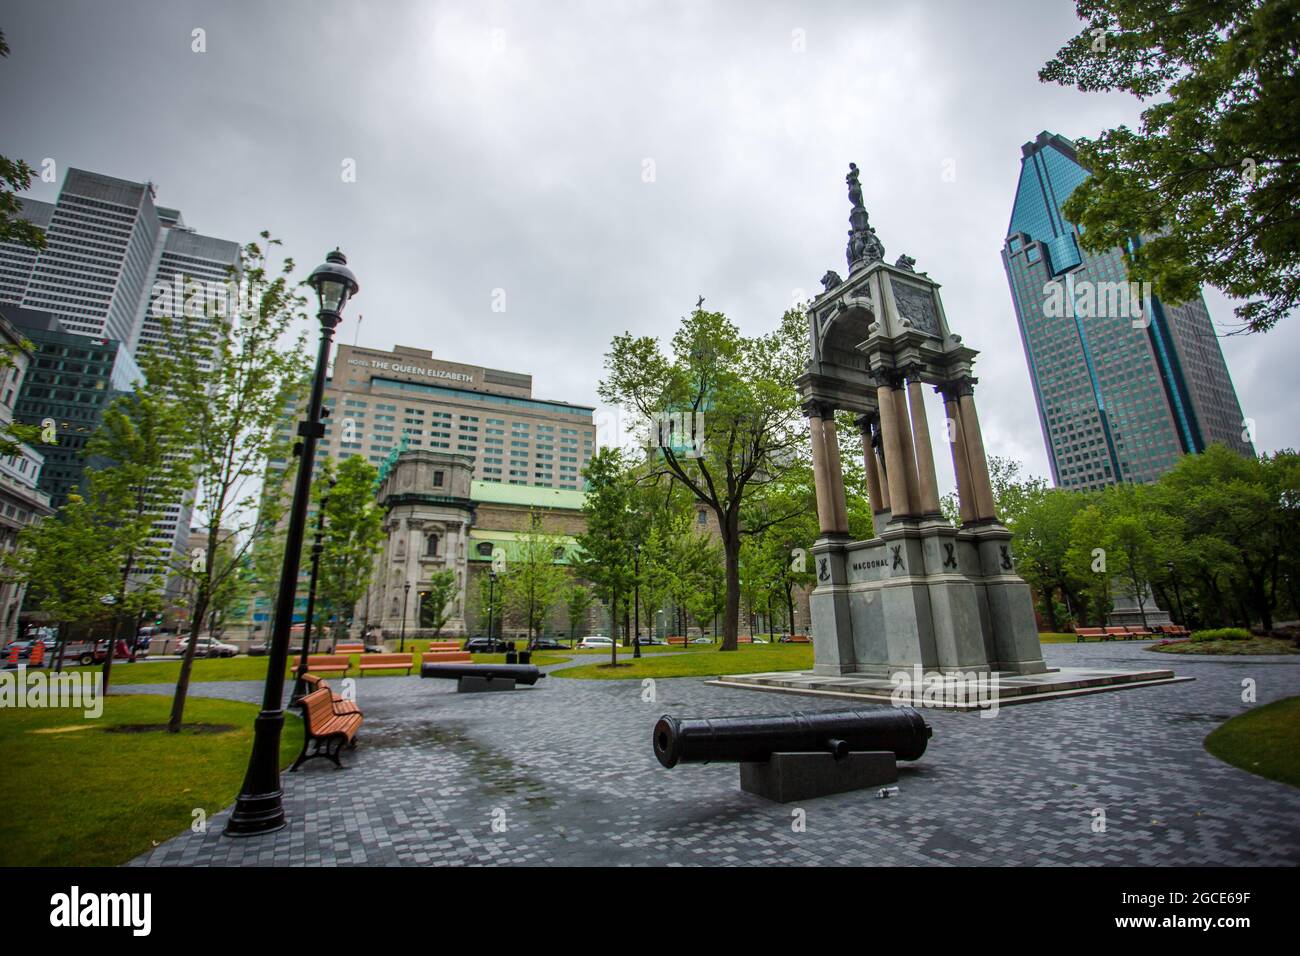 Statue of Sir John A Macdonald, the first Prime Minister of Canada at Montreal, Quebec. Stock Photo